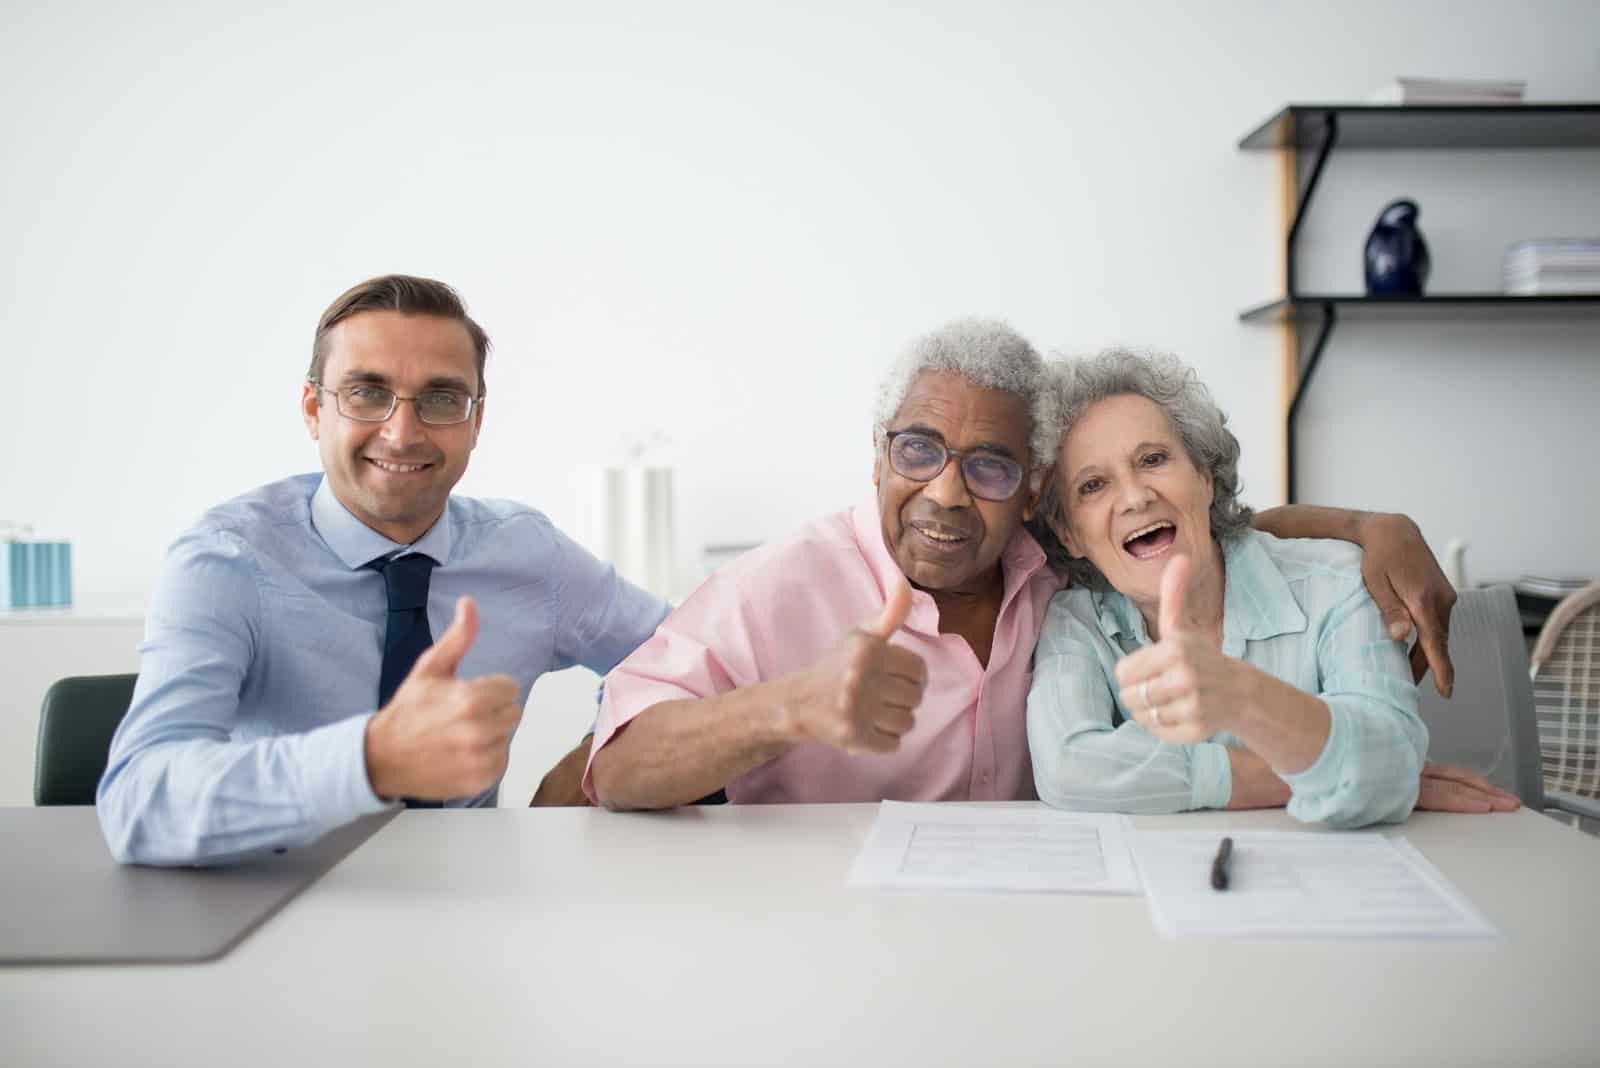 Business owner sitting with two elderly happy customers giving thumbs up.